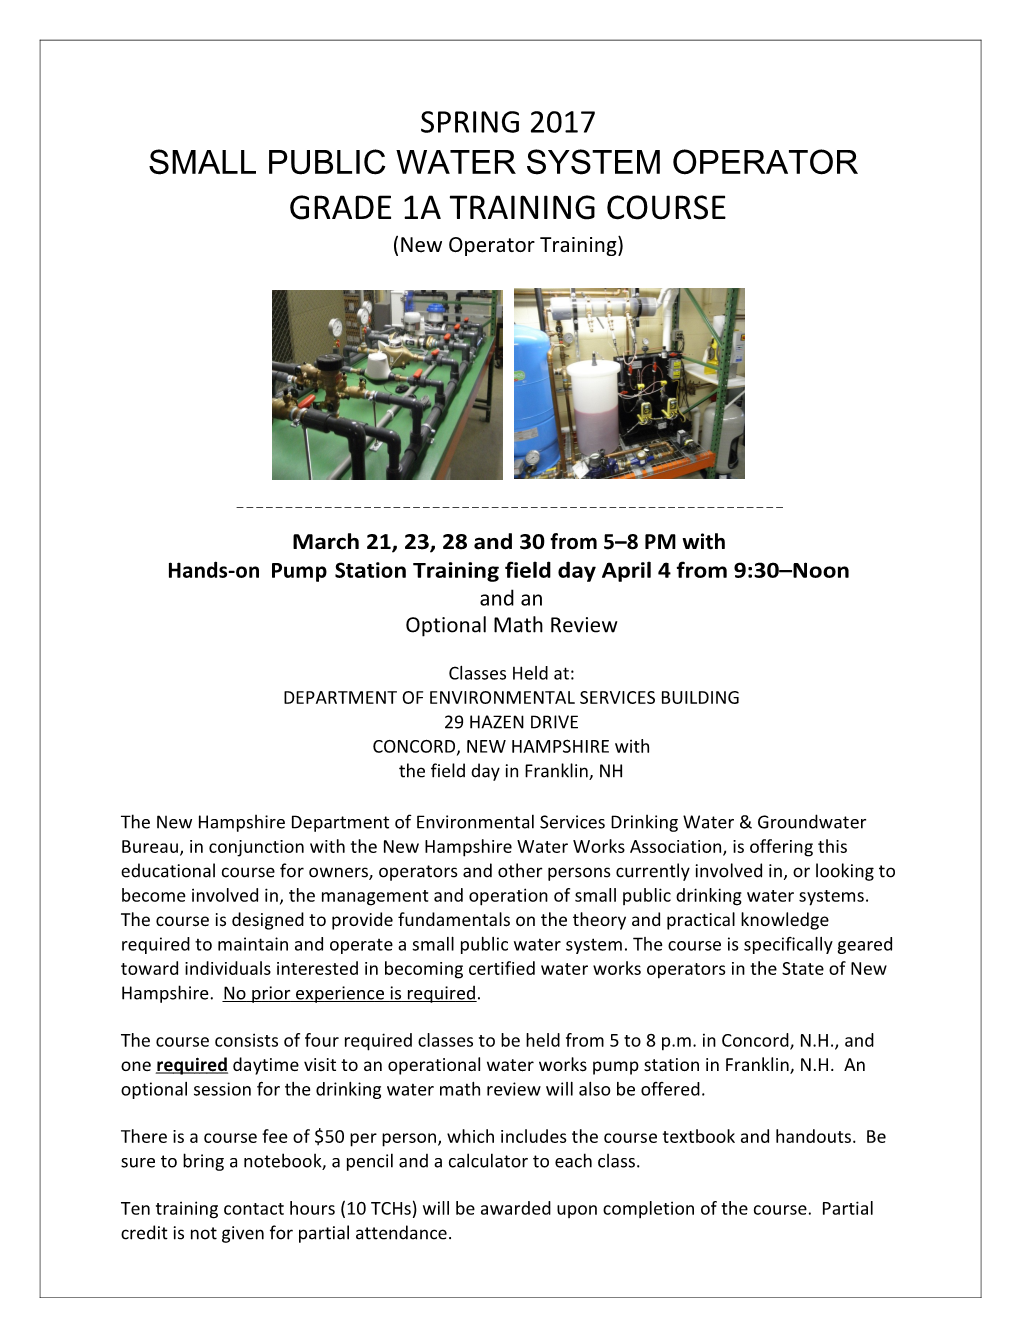 Spring 2016 Sml Water Sys Ops Course